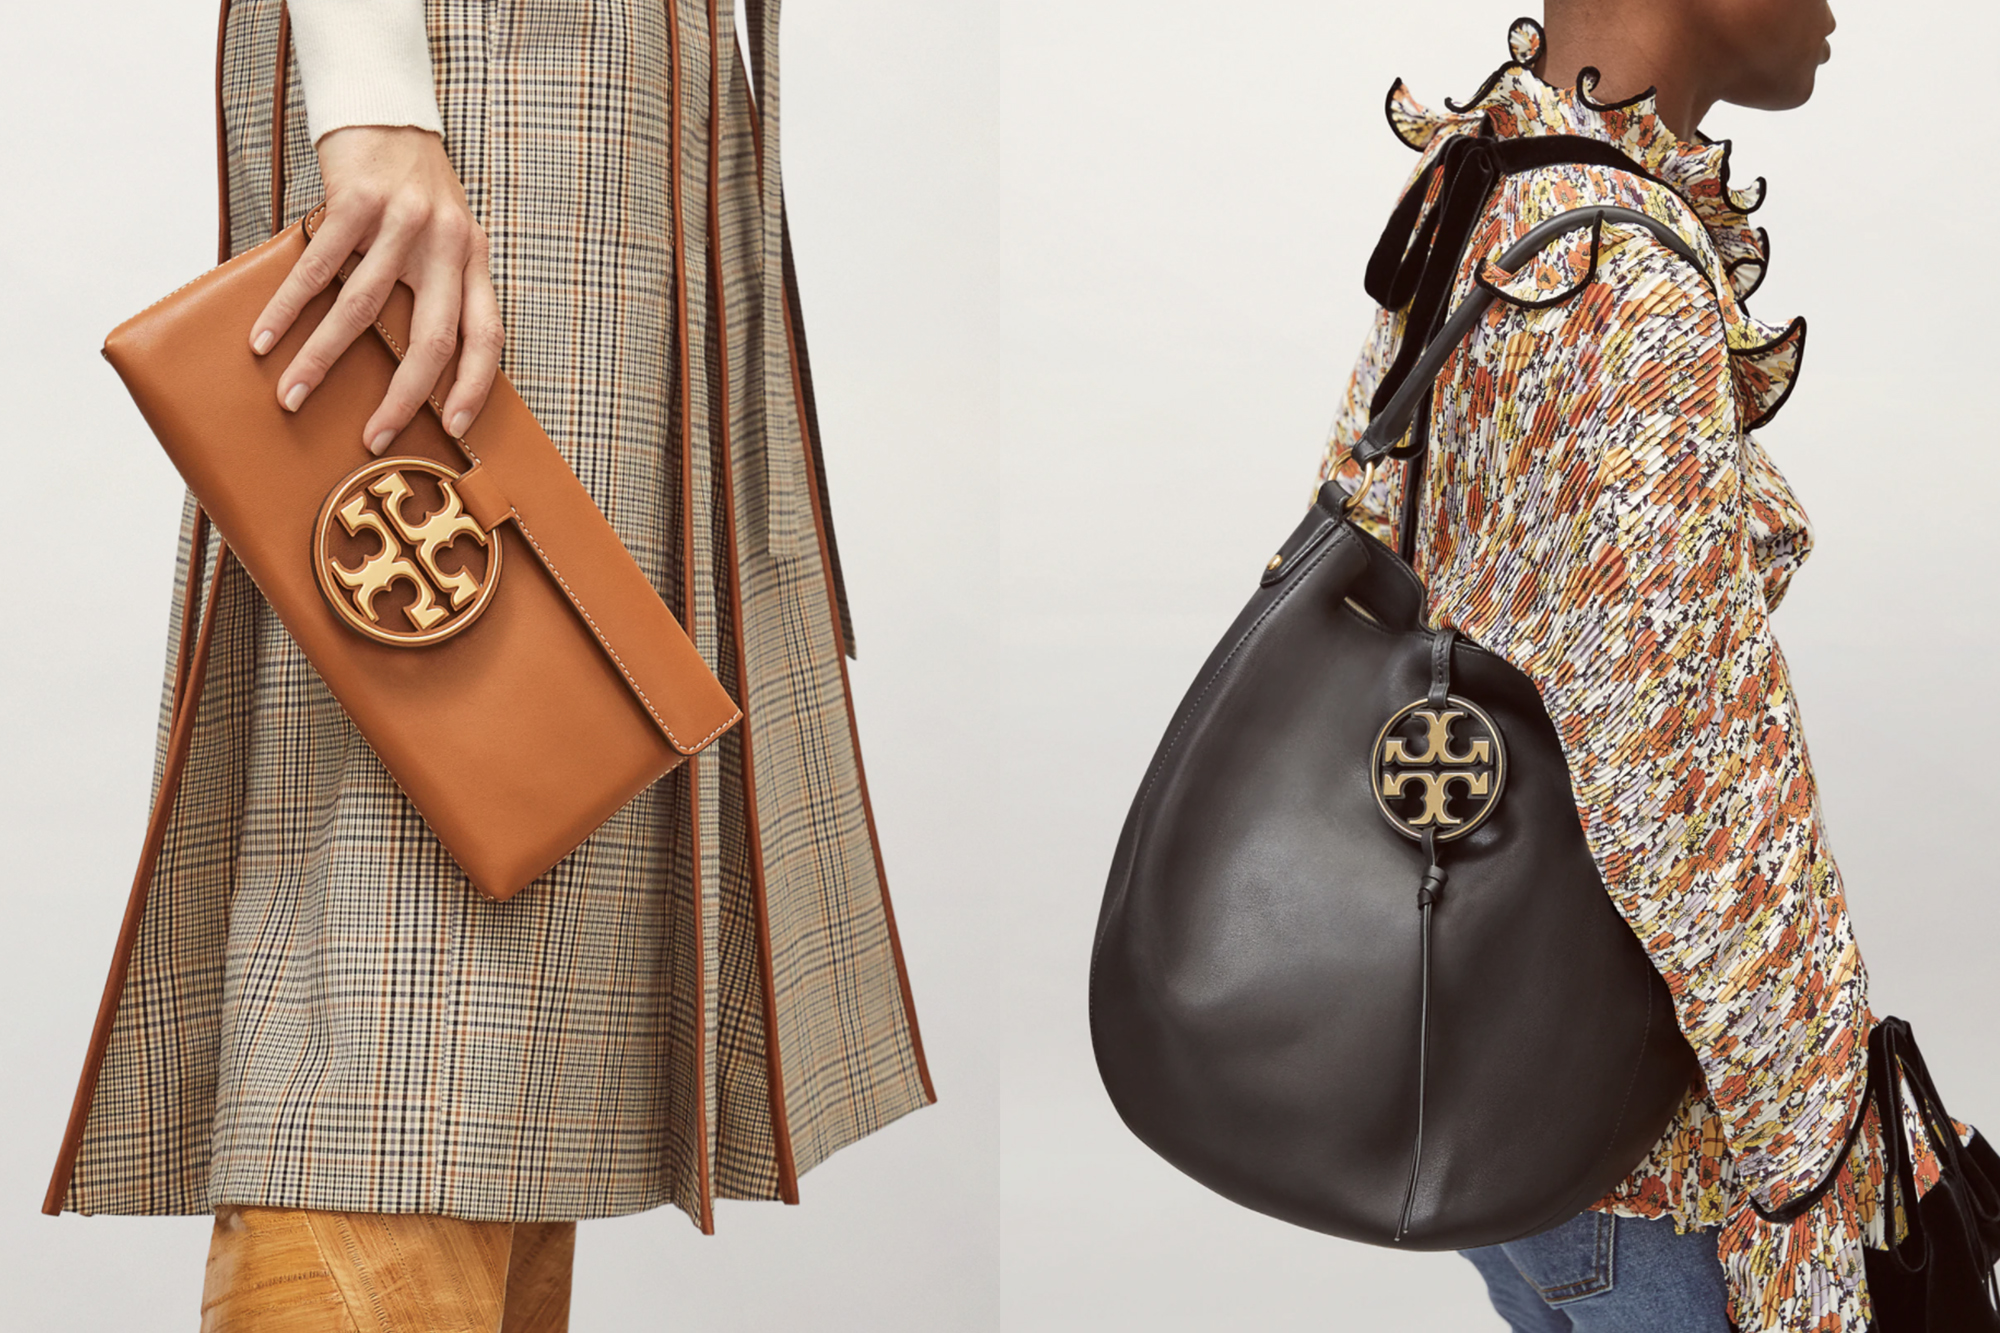 Tory Burch Just Marked Down So Many Cult-Favorite Boots & Bags